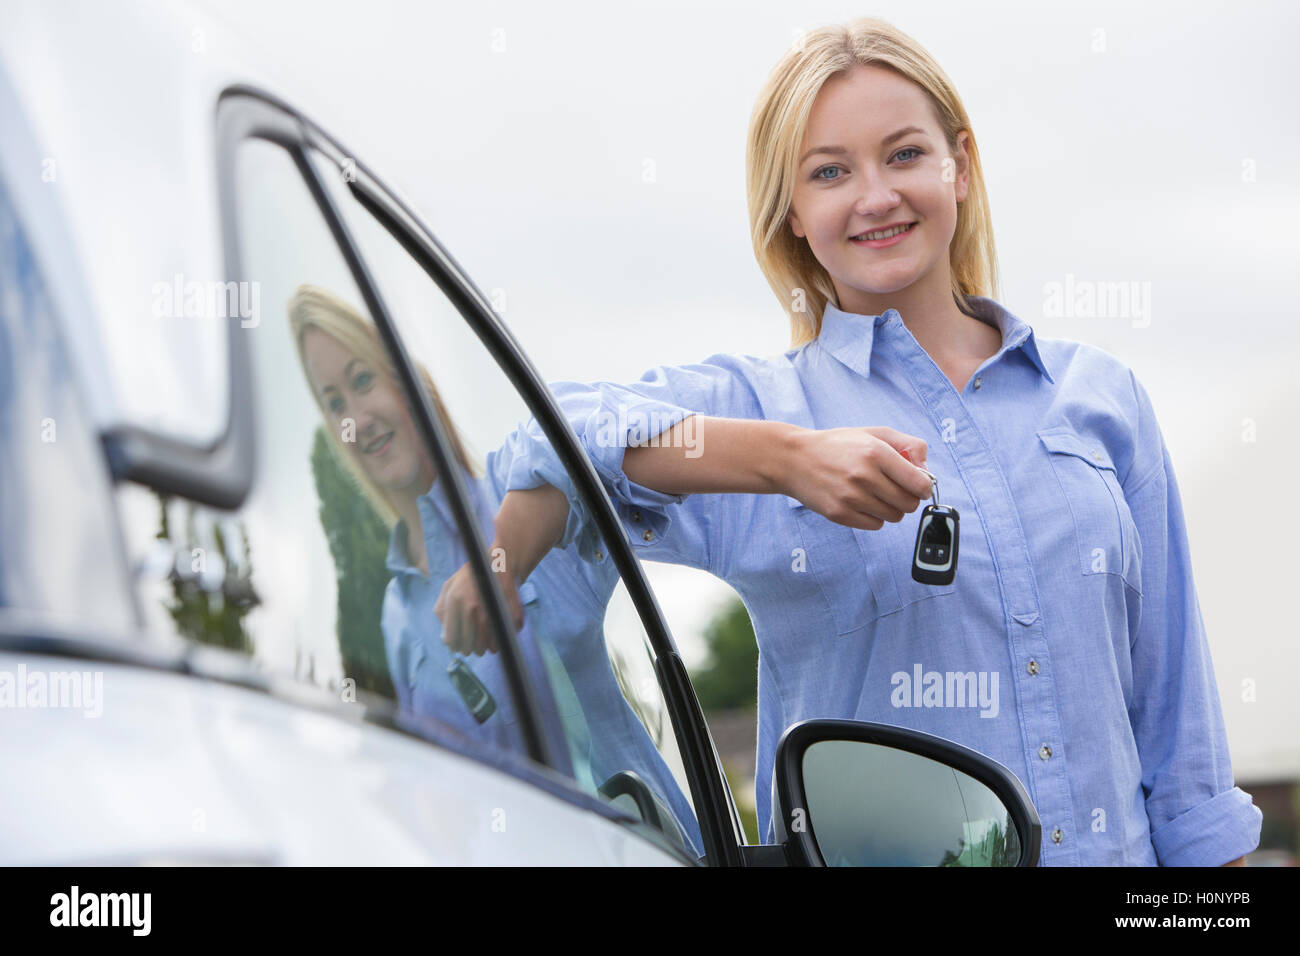 Young Female Driver Holding Car Keys Next To Vehicle Stock Photo